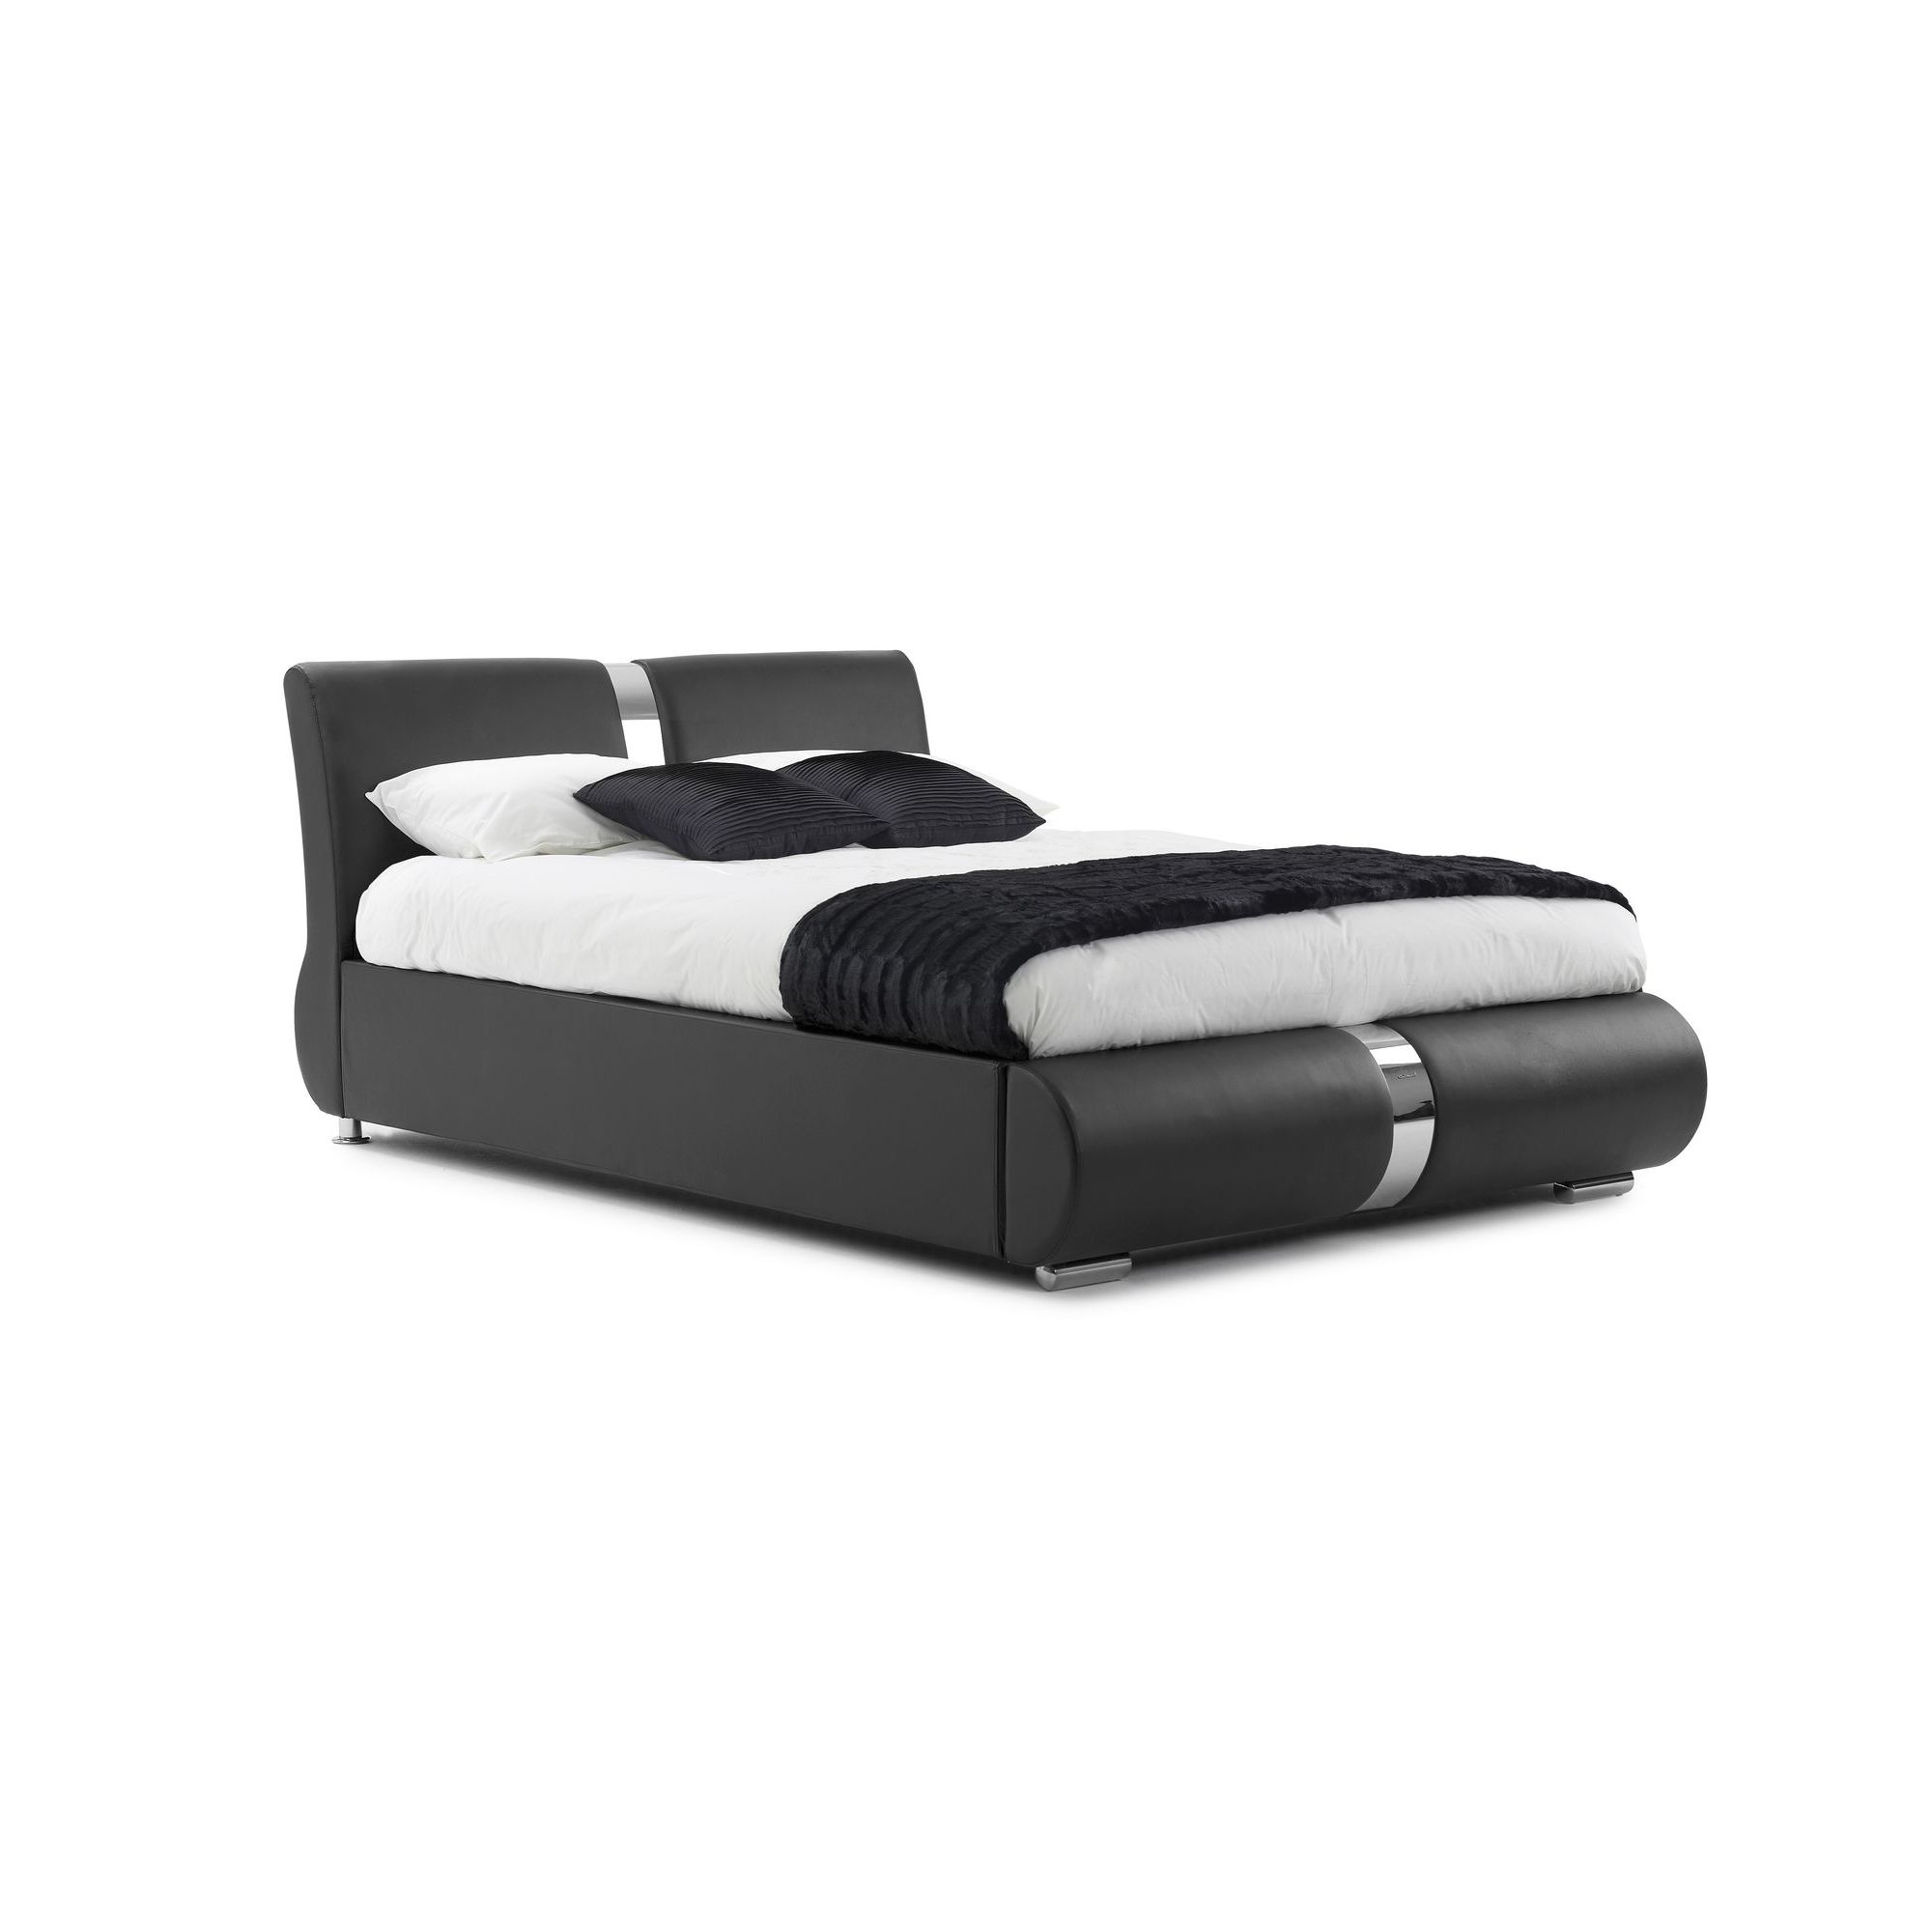 Frank Bosworth Milan Leather Bed - Black - Double at Tesco Direct